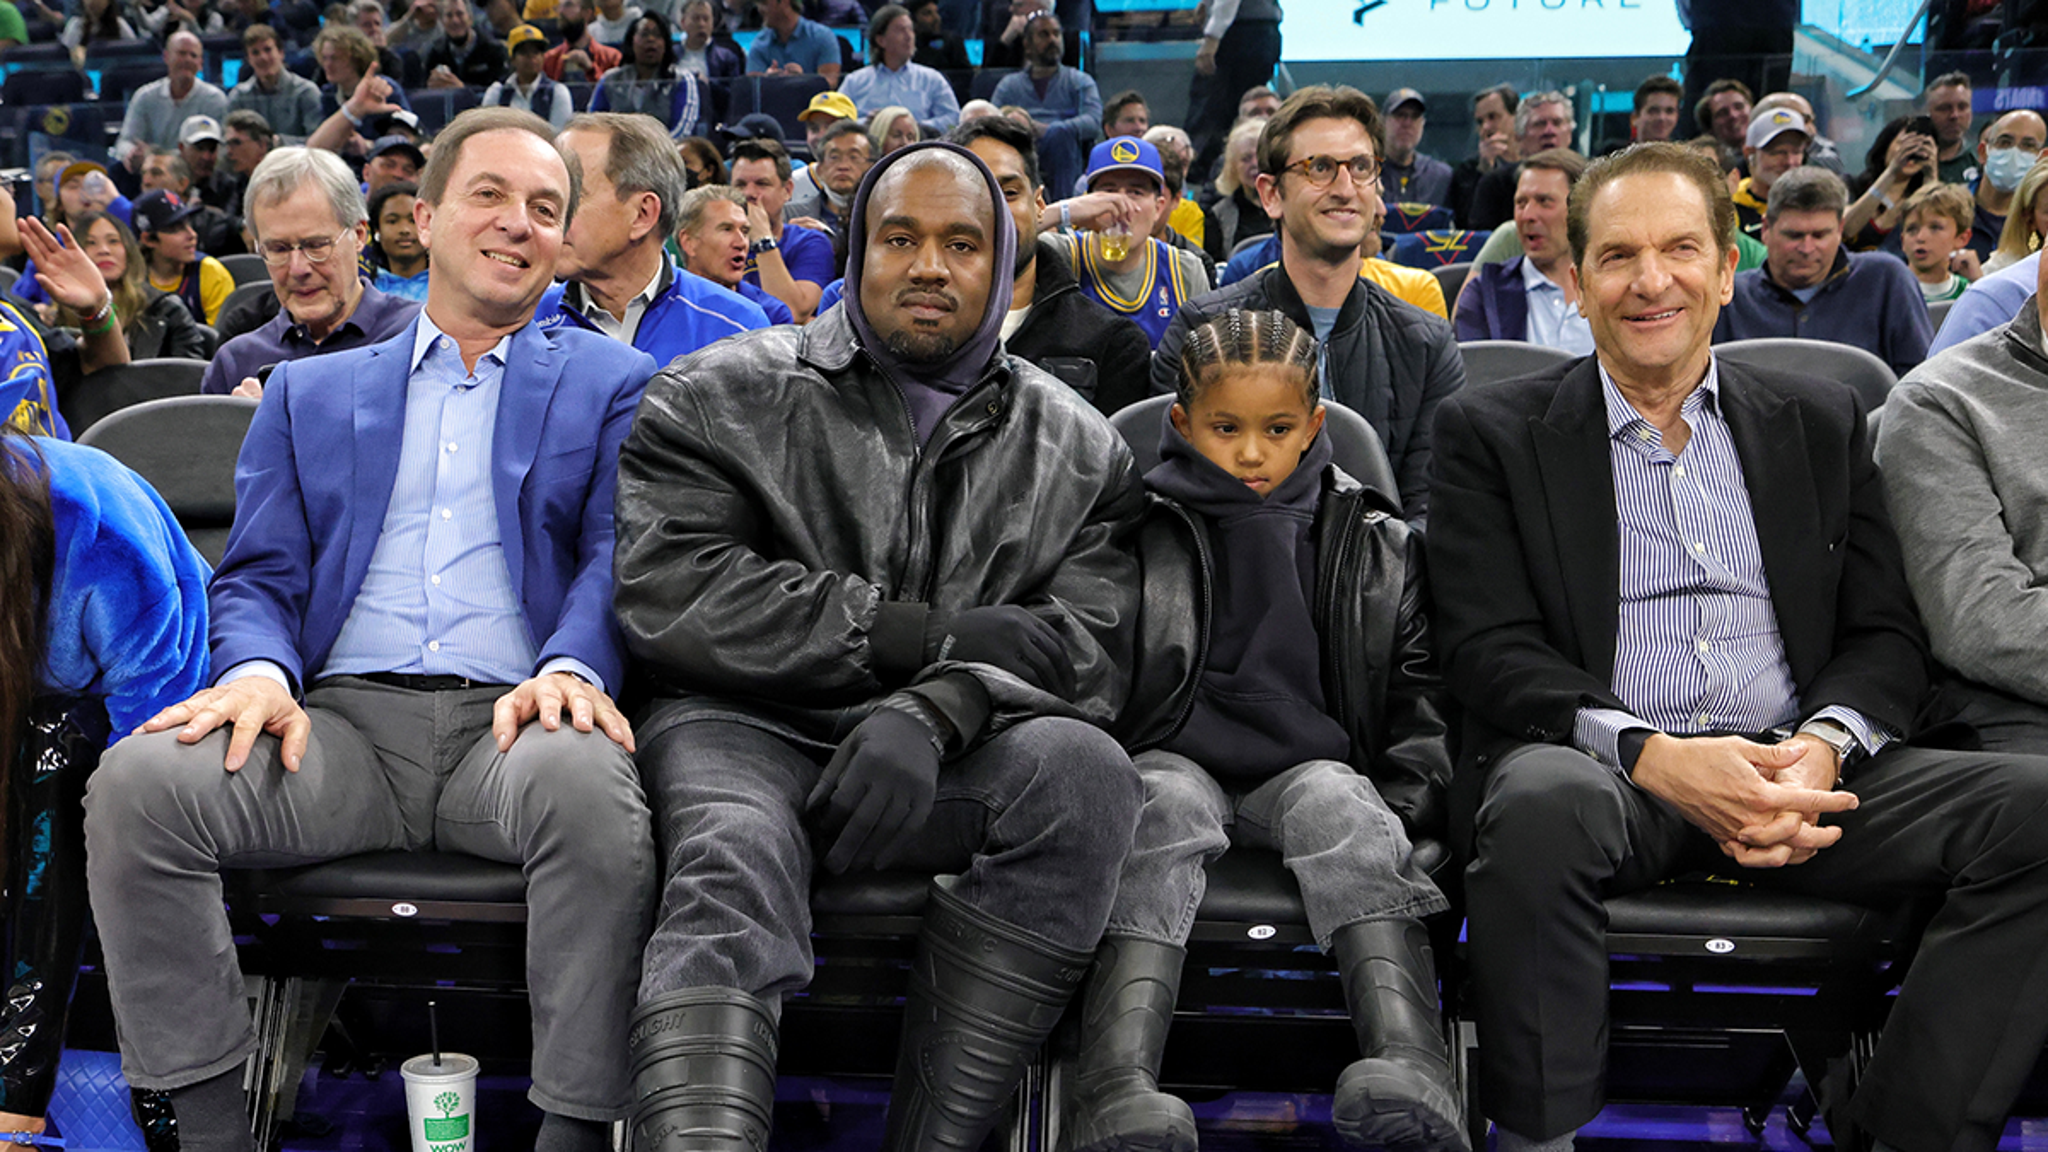 Kanye West Smiling Courtside with Saint Amid 24-Hour Instagram Ban